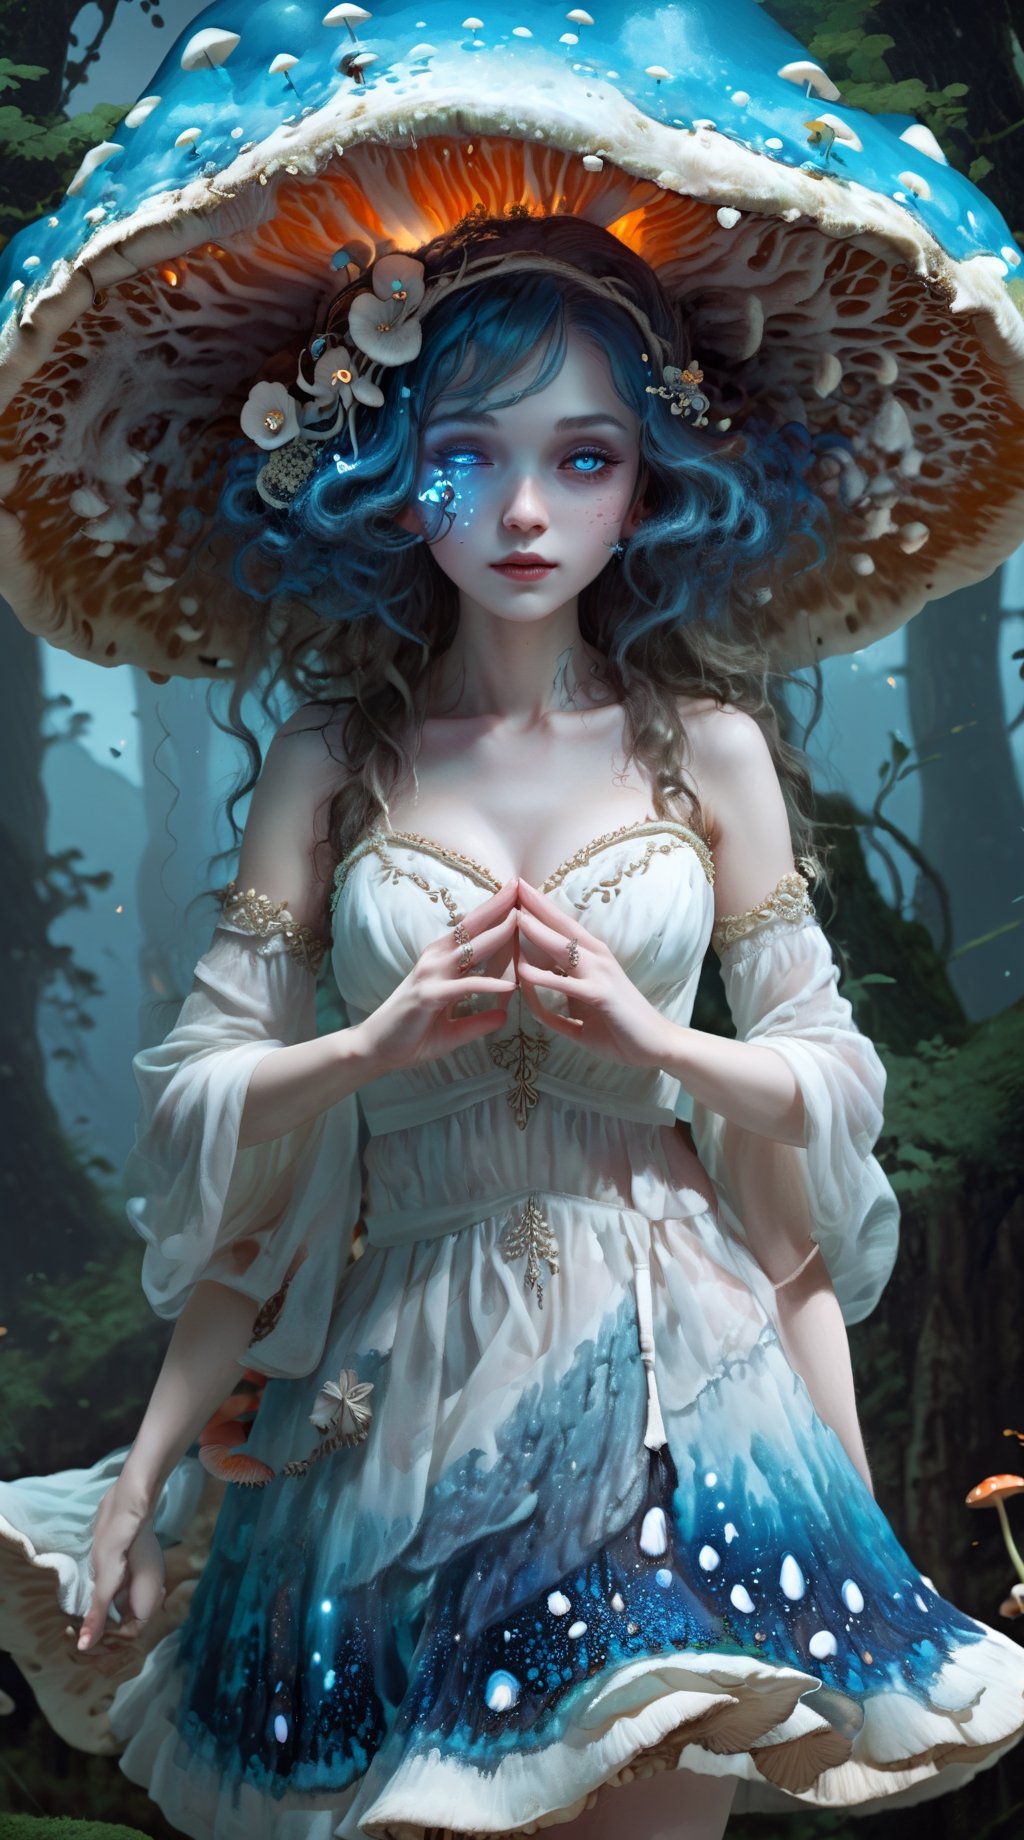 IncrsXLRanni, Fantasy, surreal, 1girl, dynamic pose, (blue skin:1.4), flow curly hair, white dress, flows on the body, cyan&white color, sweetheart neckline, a flared skirt adorned by intricate embellishments of floral patterns, stars, and crescent moons, biolumiscent glow musroom, beads, sequins, crystals, (cyan glow mushrooms:1.2), and pearls that sparkling, has a veil and hat which also has floral, star, and moon motifs that complement the dress. Neon-glow-mushroom accesorized dress, Combination of fashionable and fantasy, creative, Hyperdetailed artwork,IncrsXLRanni,wavy hair, blue skin, cracked skin,girl,DonShr00mXL 